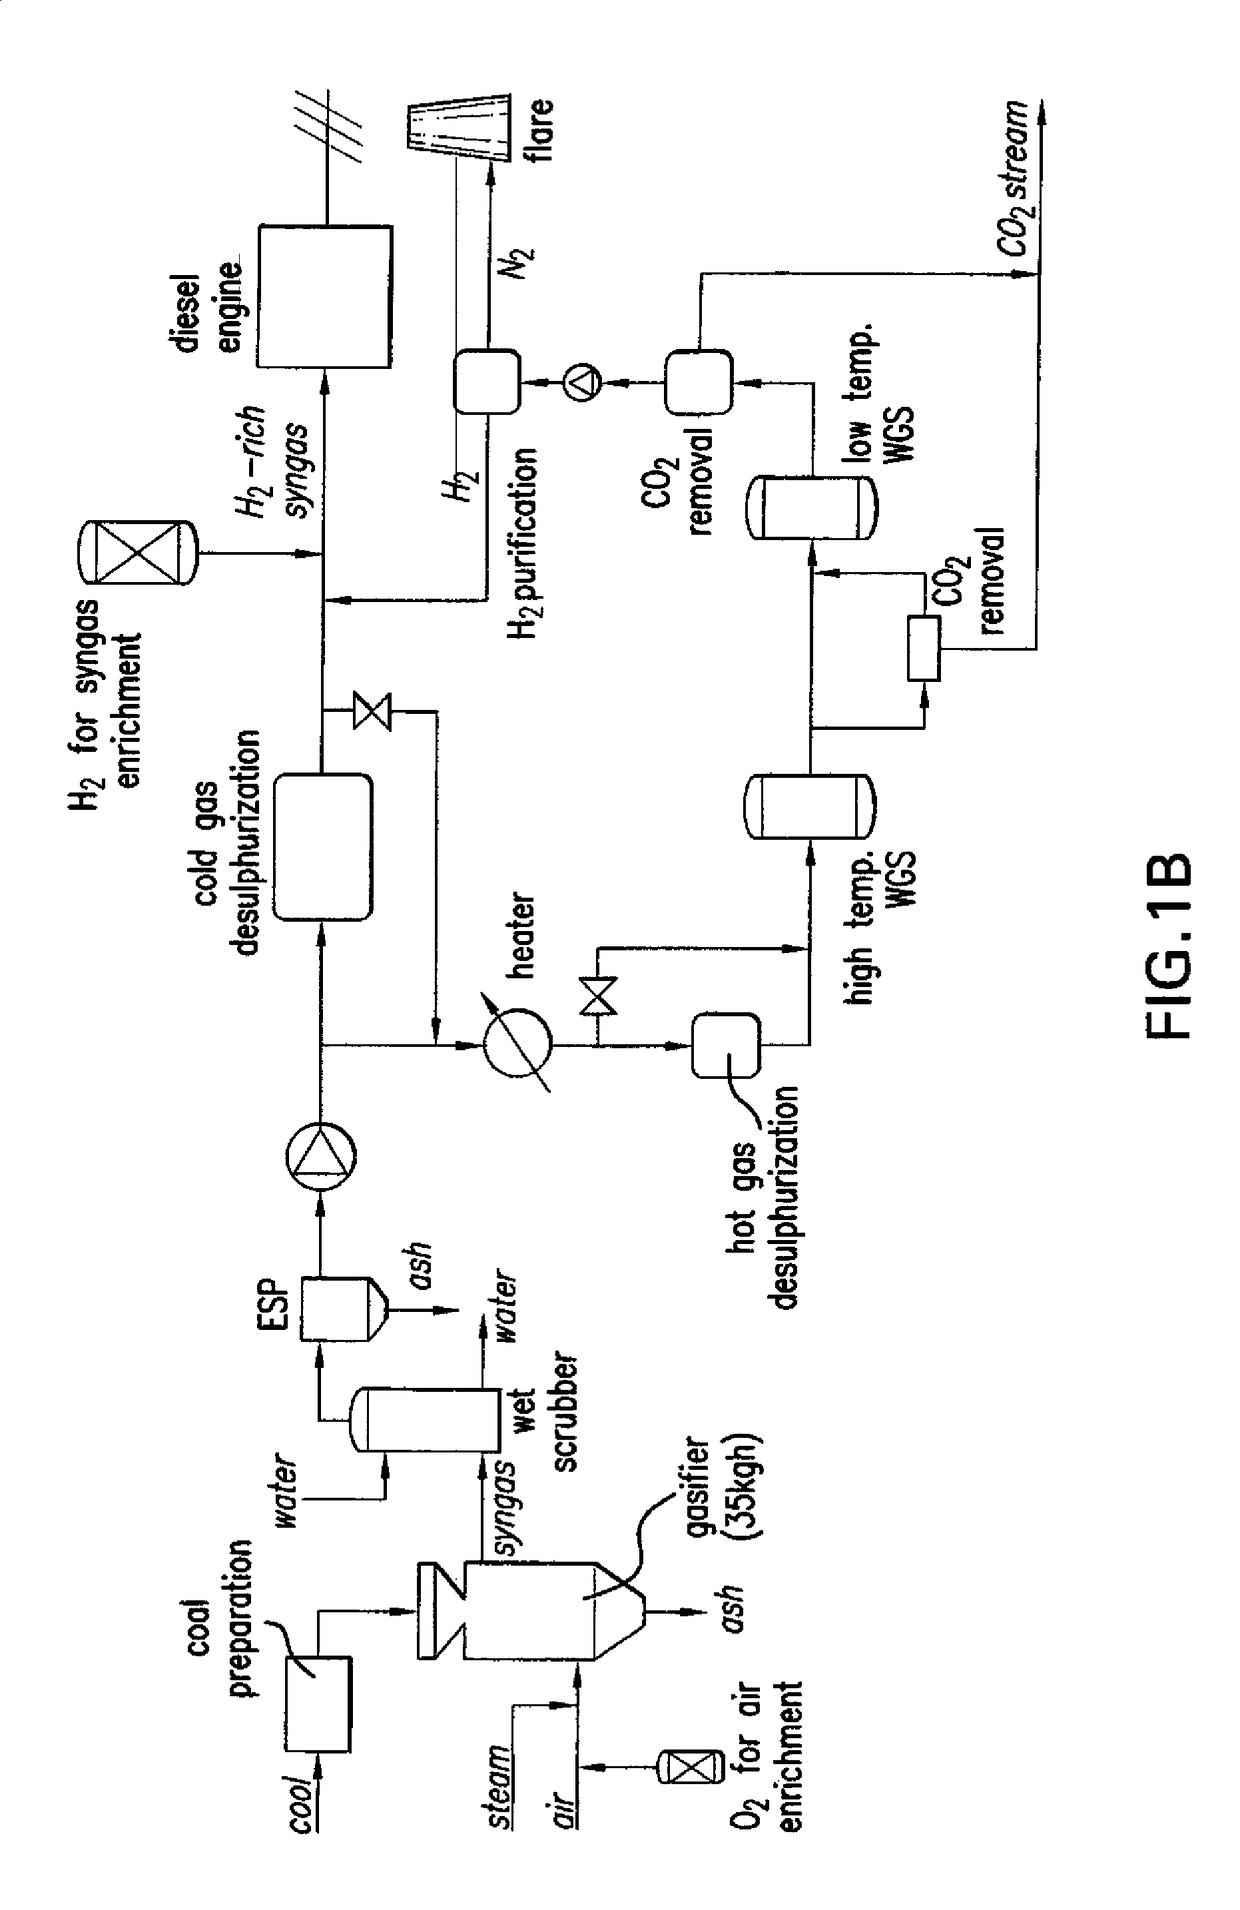 Method and apparatus for using frozen carbon dioxide blocks or cylinders to recover oil from abandoned oil wells